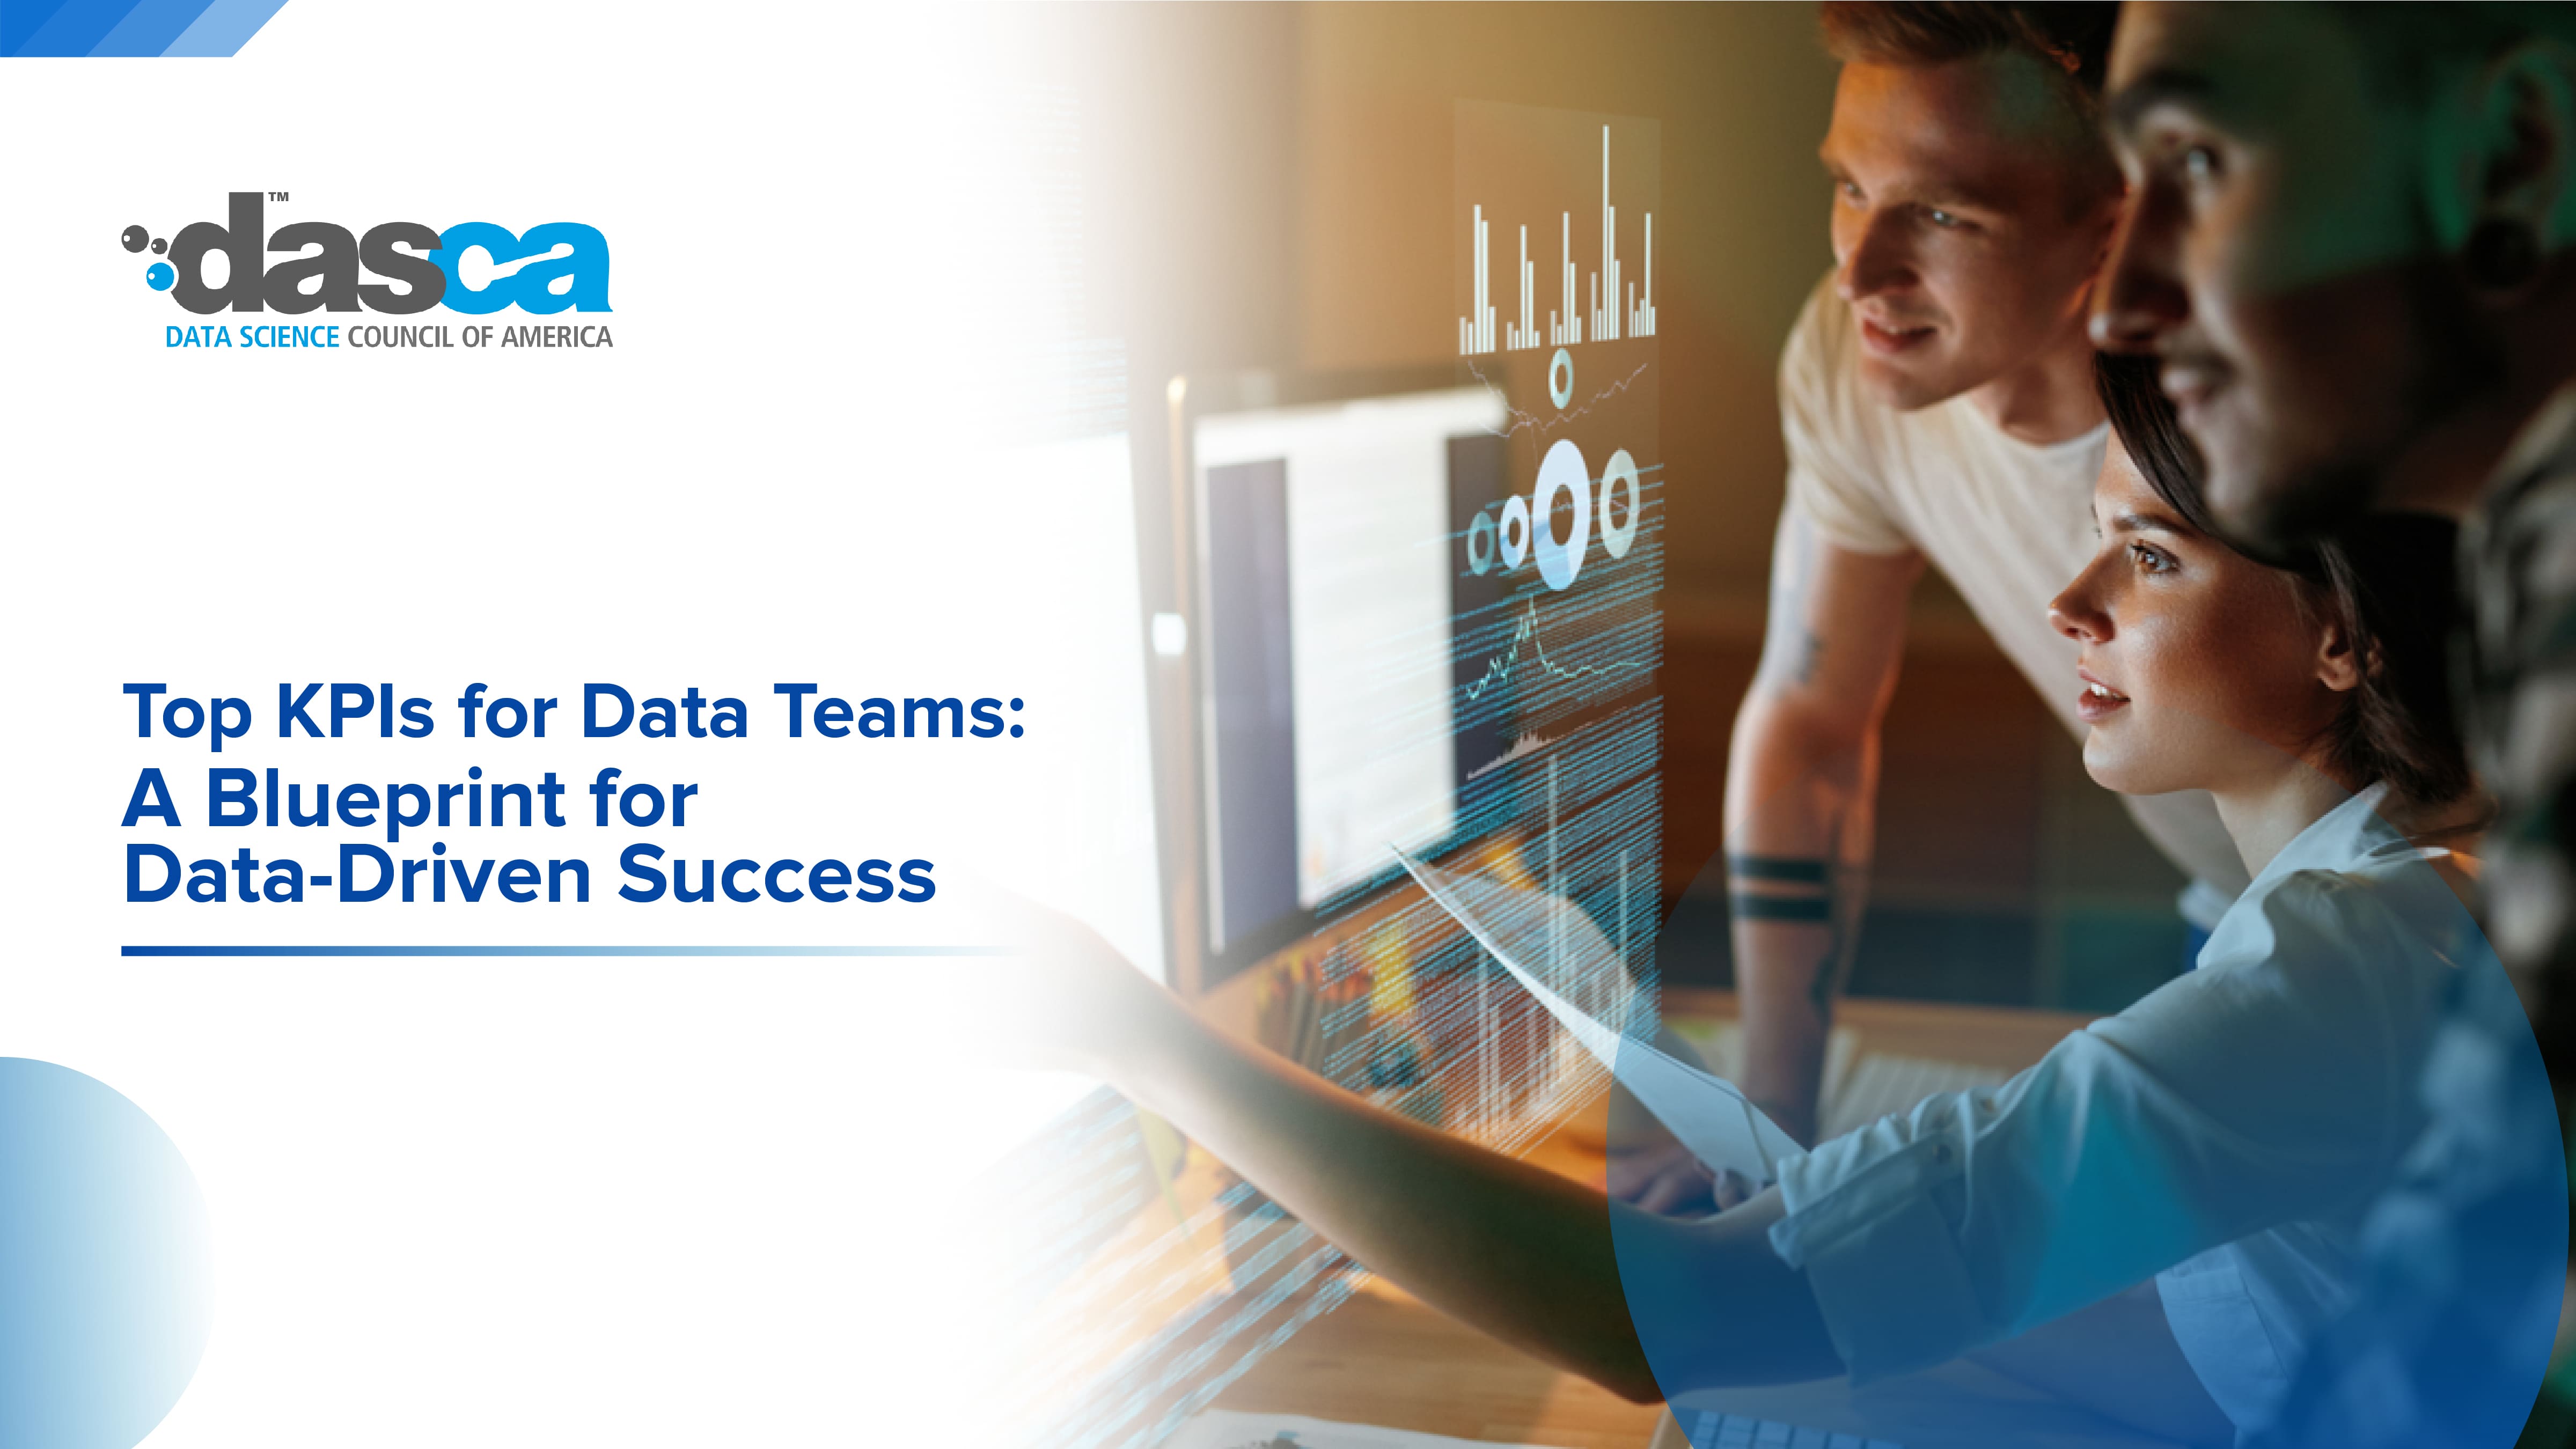 Top KPIs for Data Teams